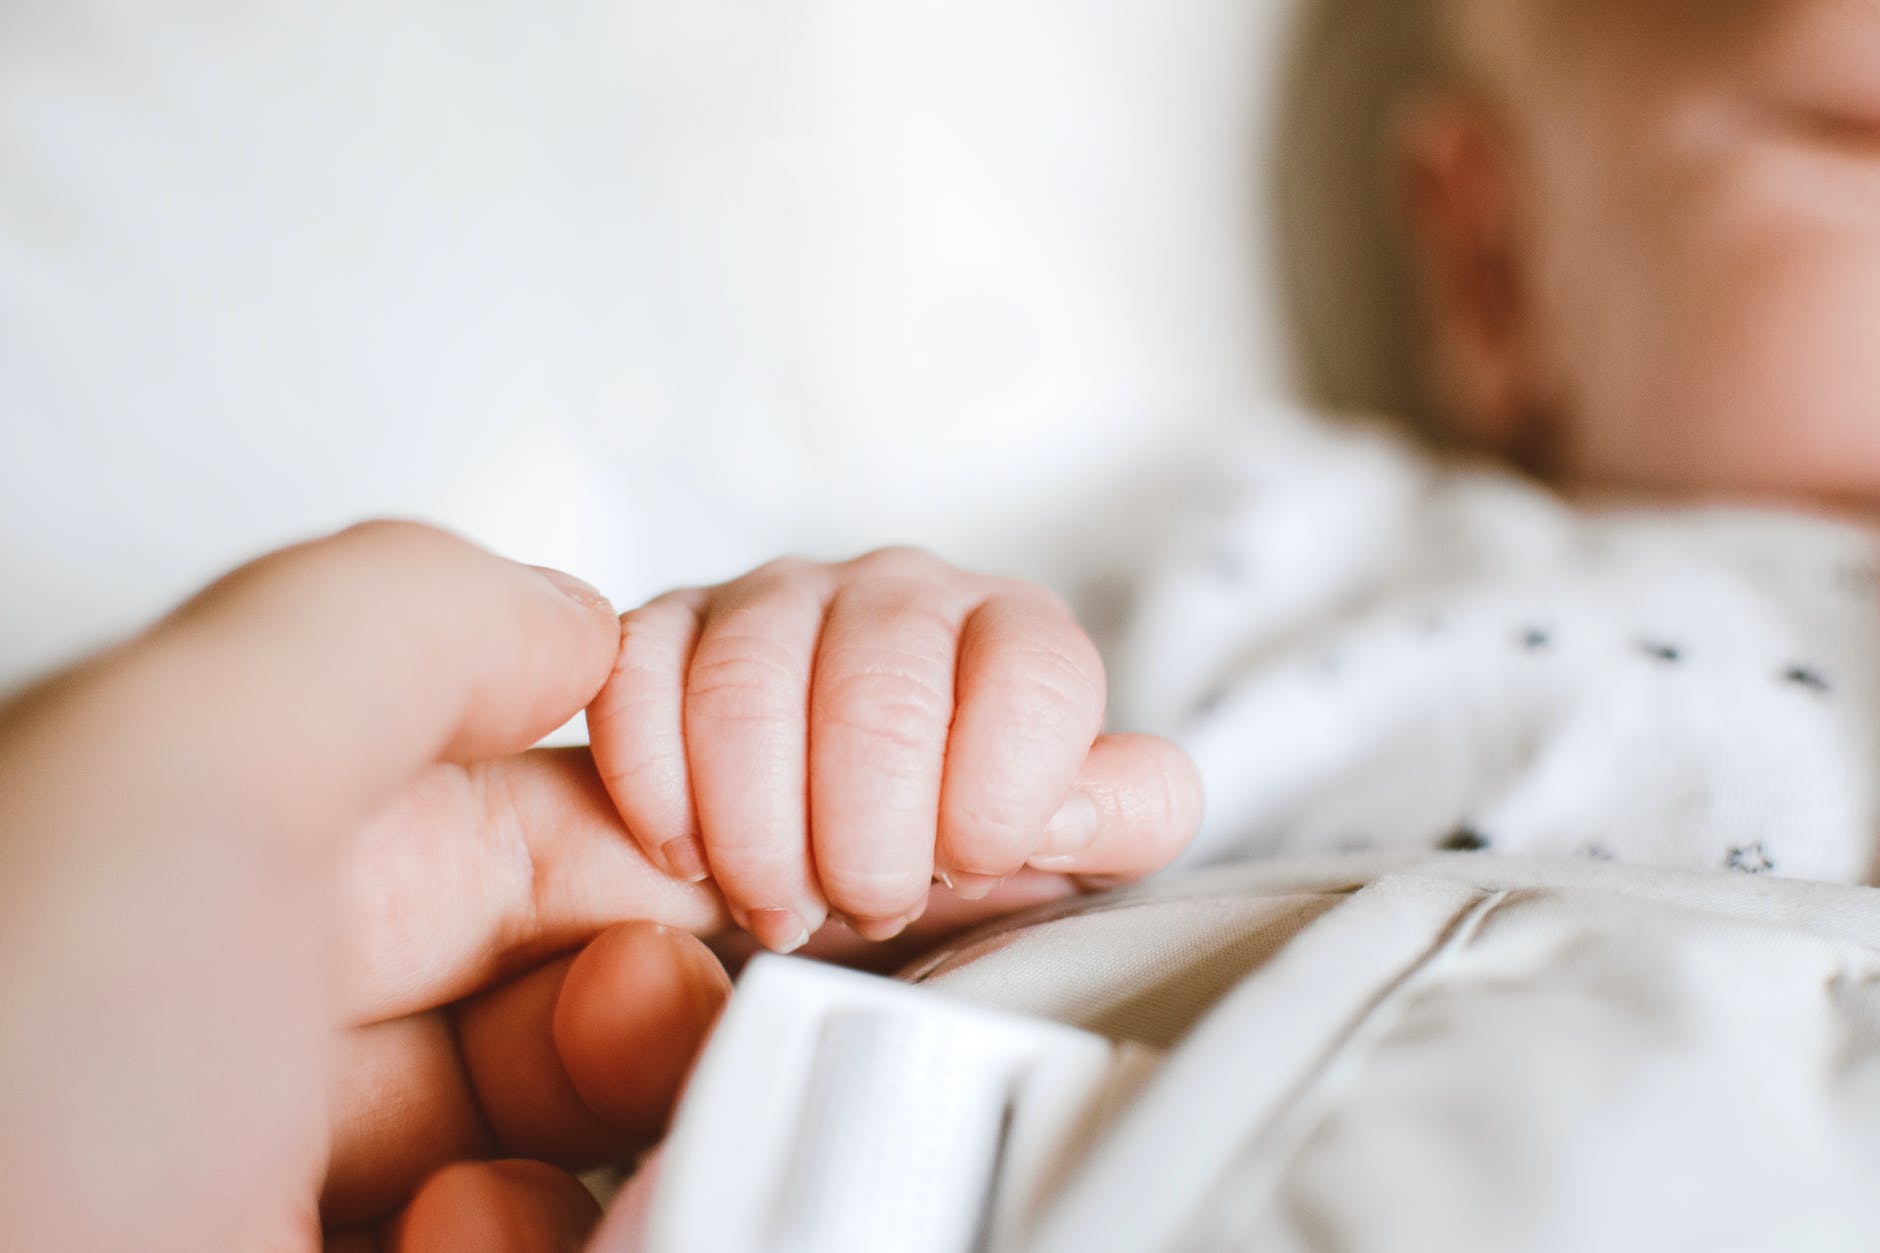 Close up photo of a baby's hand gripping an adult's finger